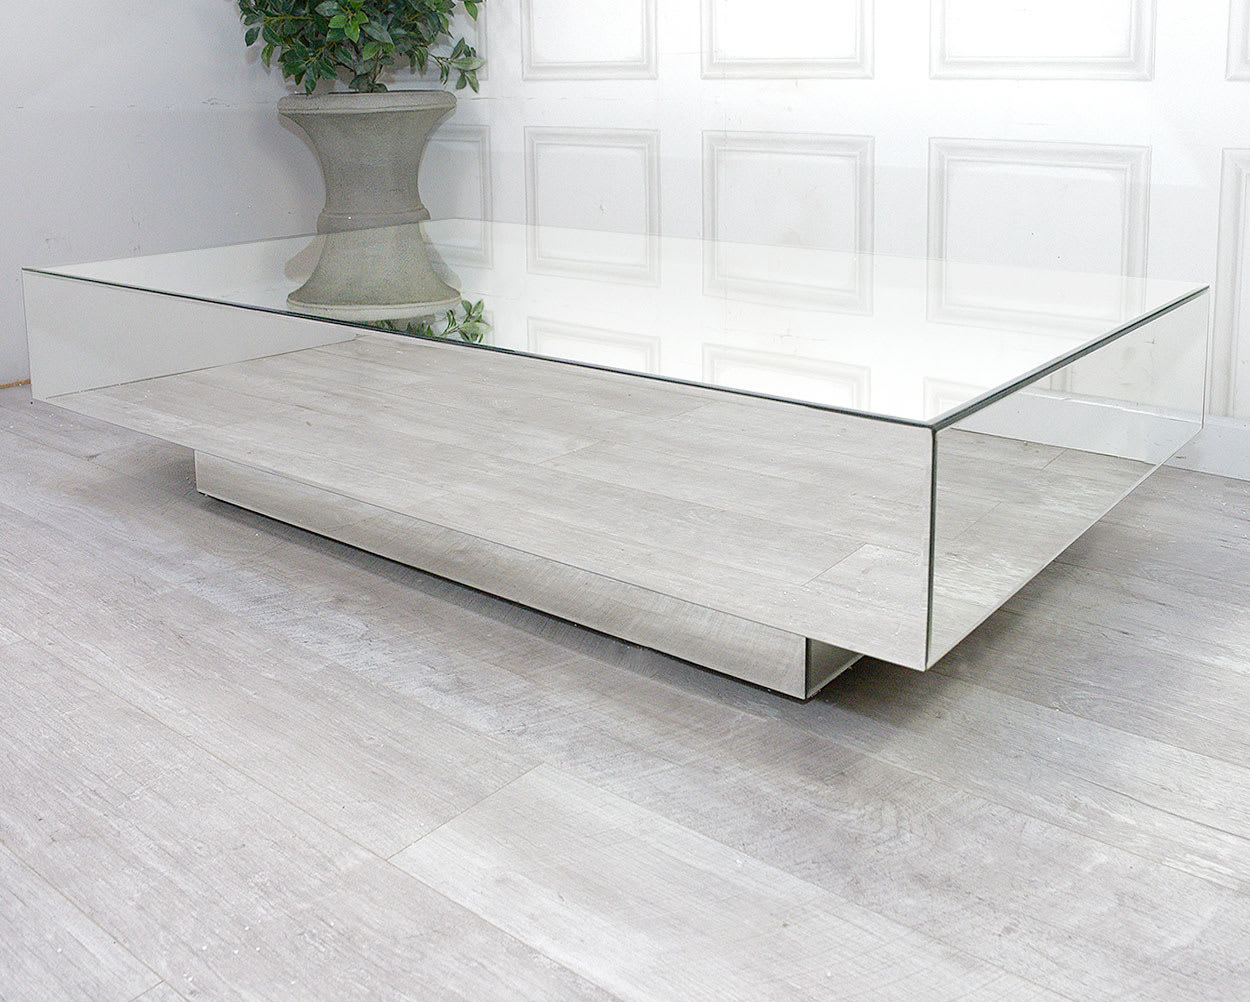 Mirrored Glass Block Style Coffee Table